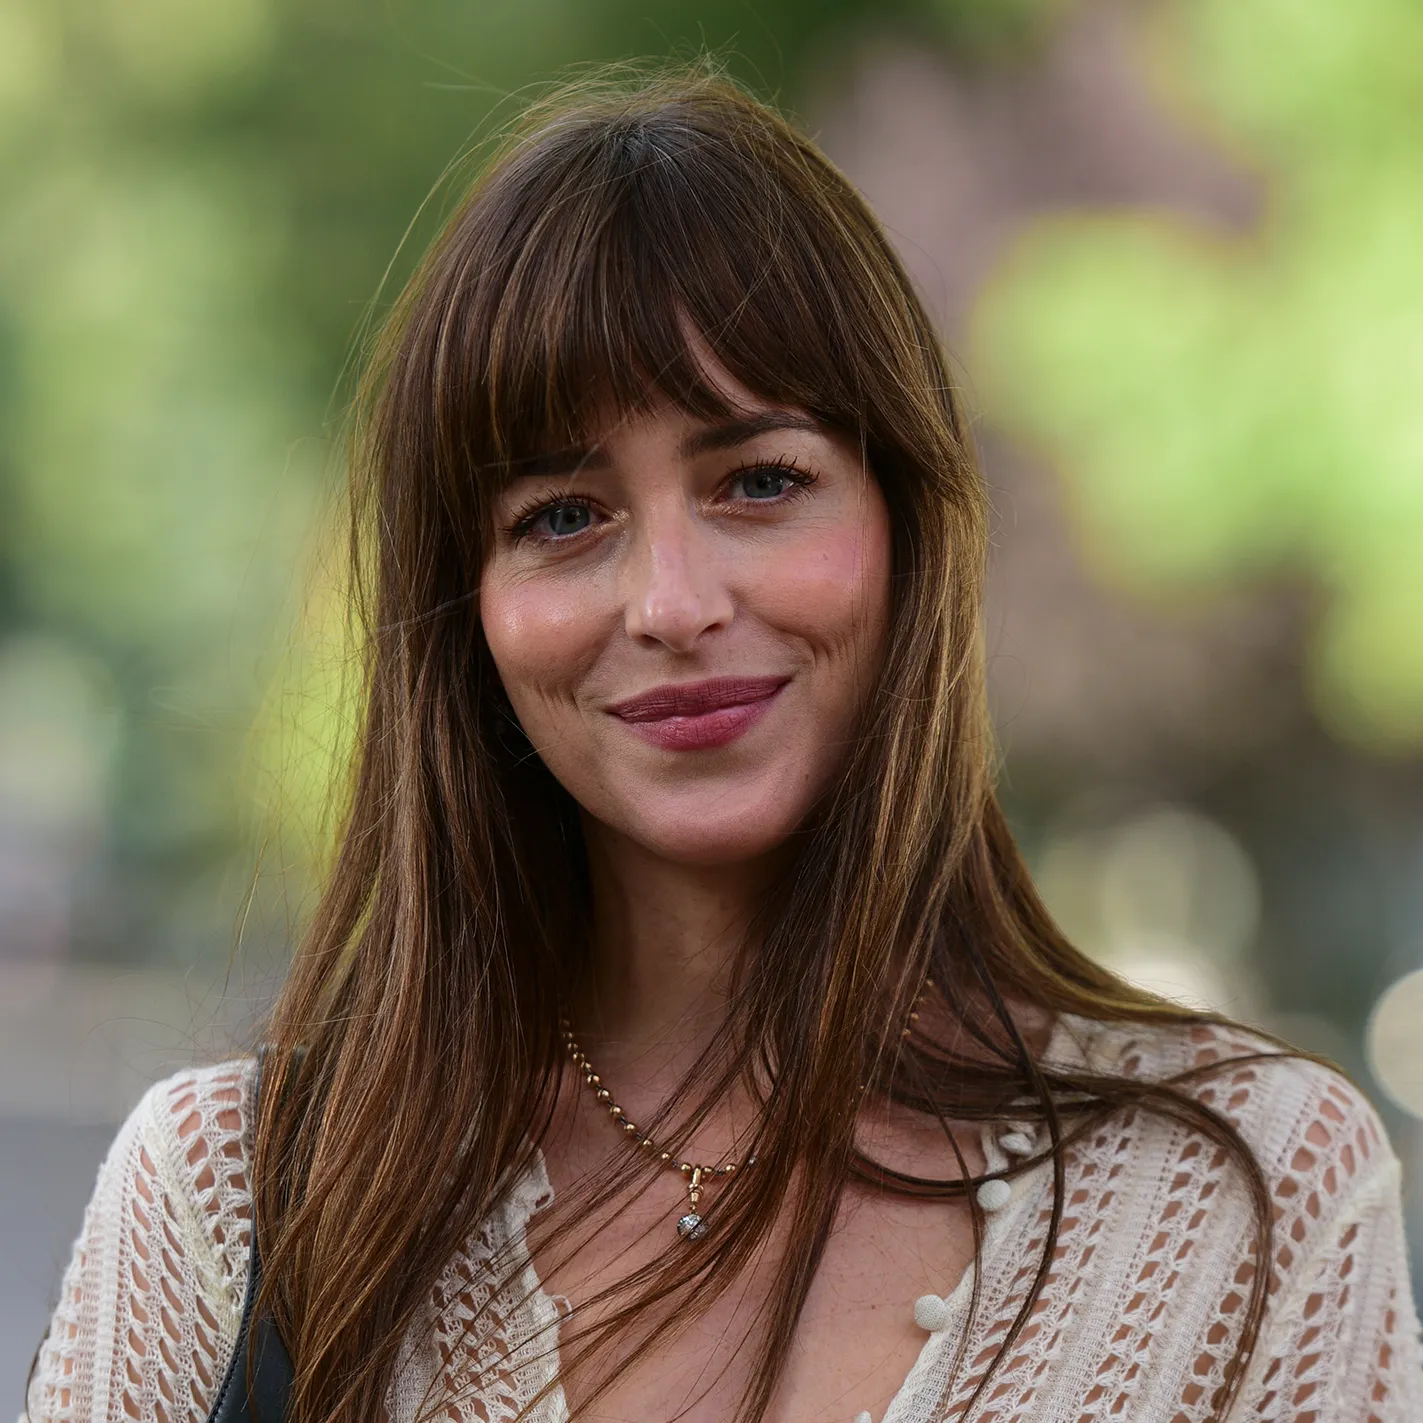 Dakota Johnson Reveals She Sleeps Up To 14 Hours Per Night And It’s Her Number One Priority